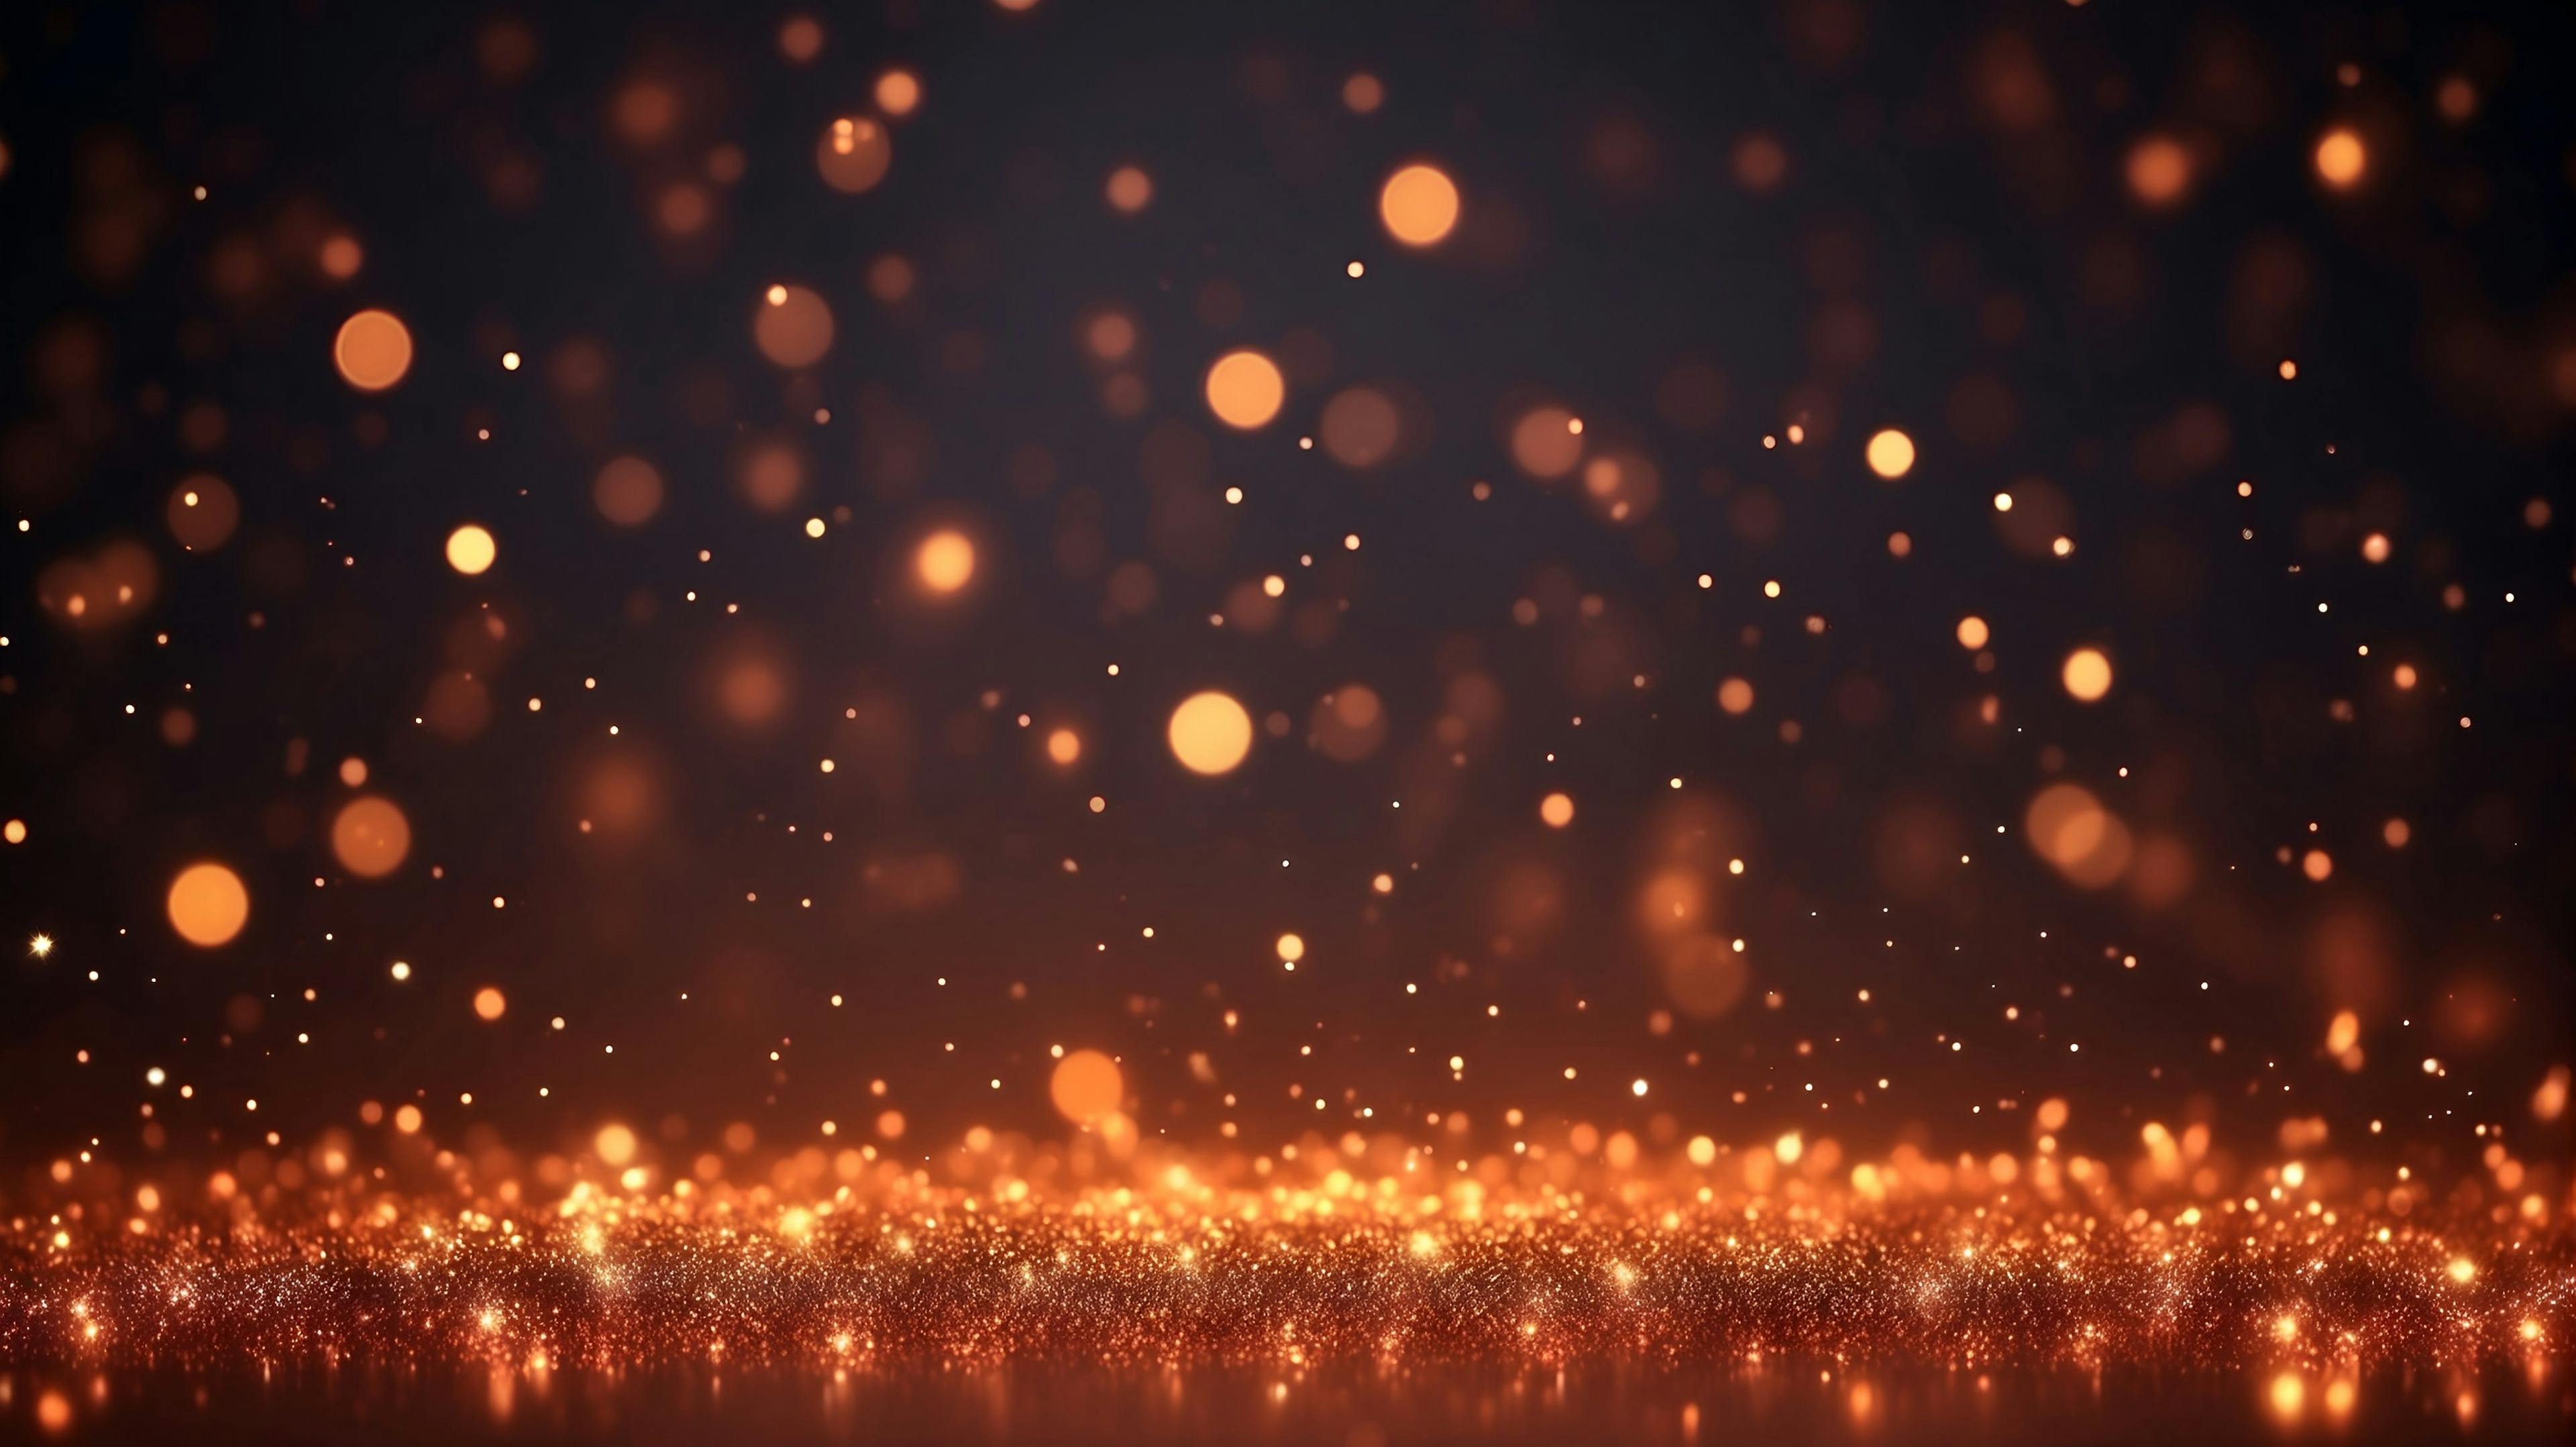 copper glow particle bokeh background, abstract glitter wallpaper illustration. Generated with AI. | Image Credit: © ArtistiKa - stock.adobe.com